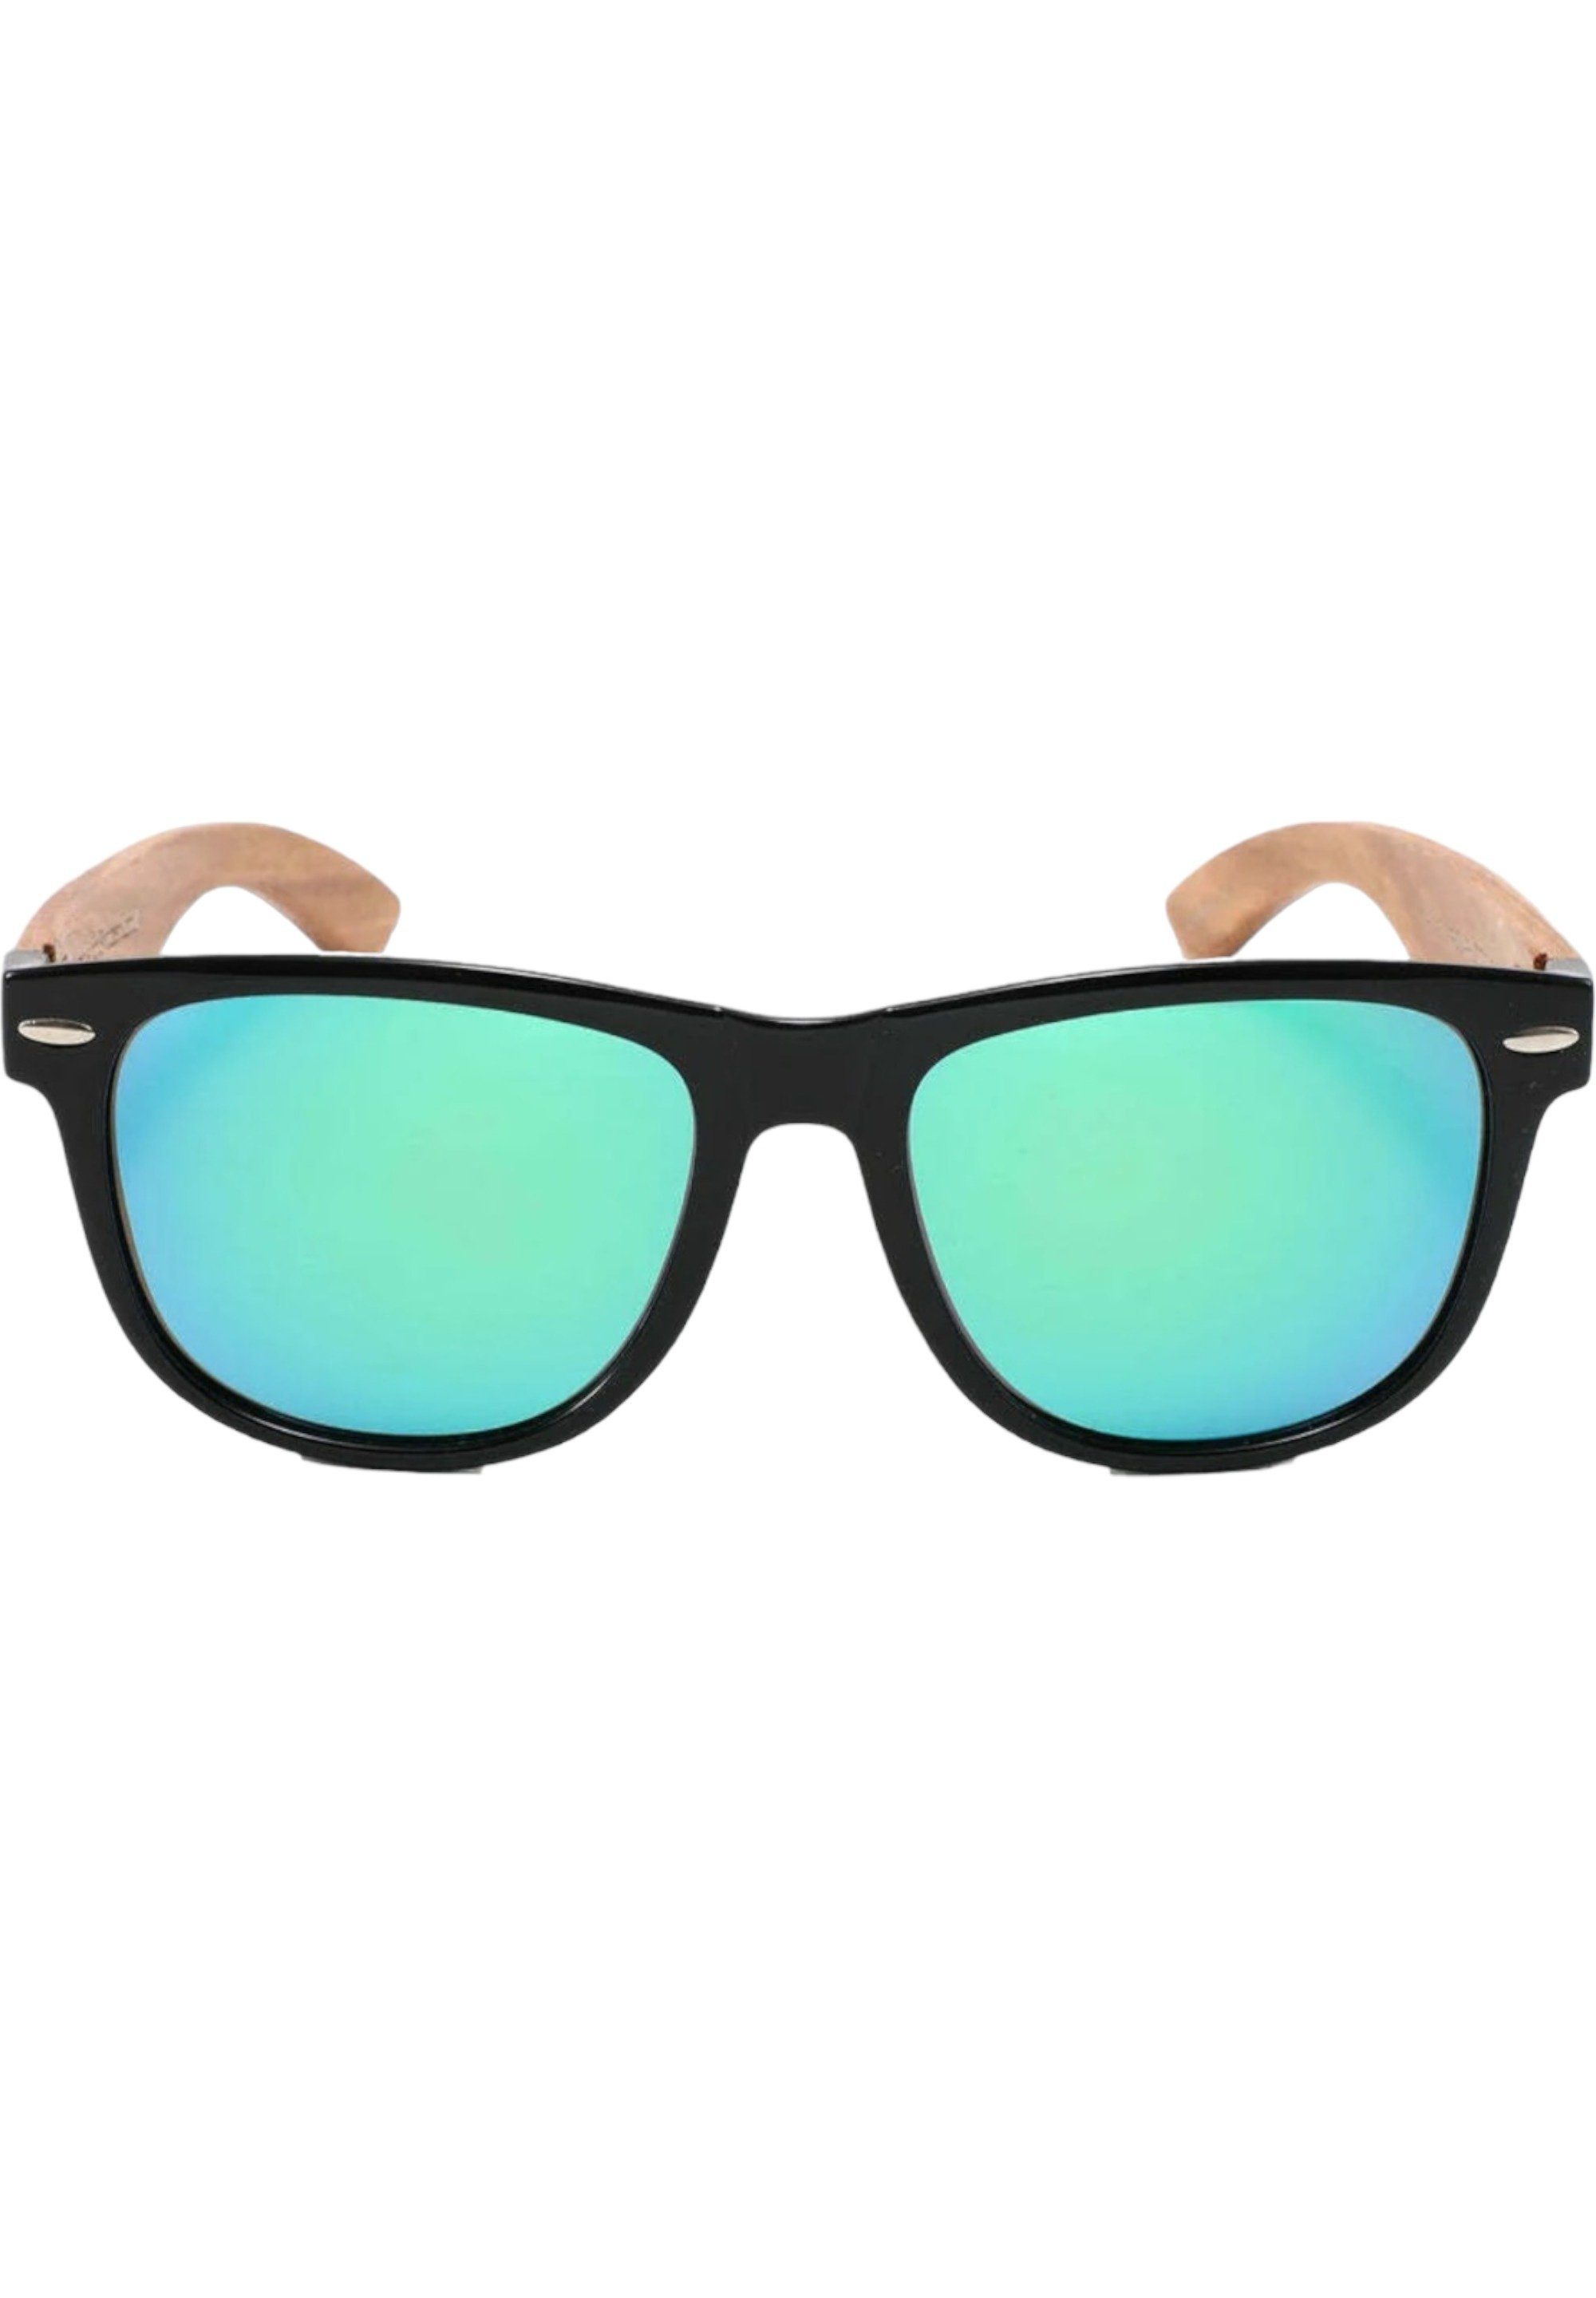 ZOVOZ Sonnenbrille Heracles